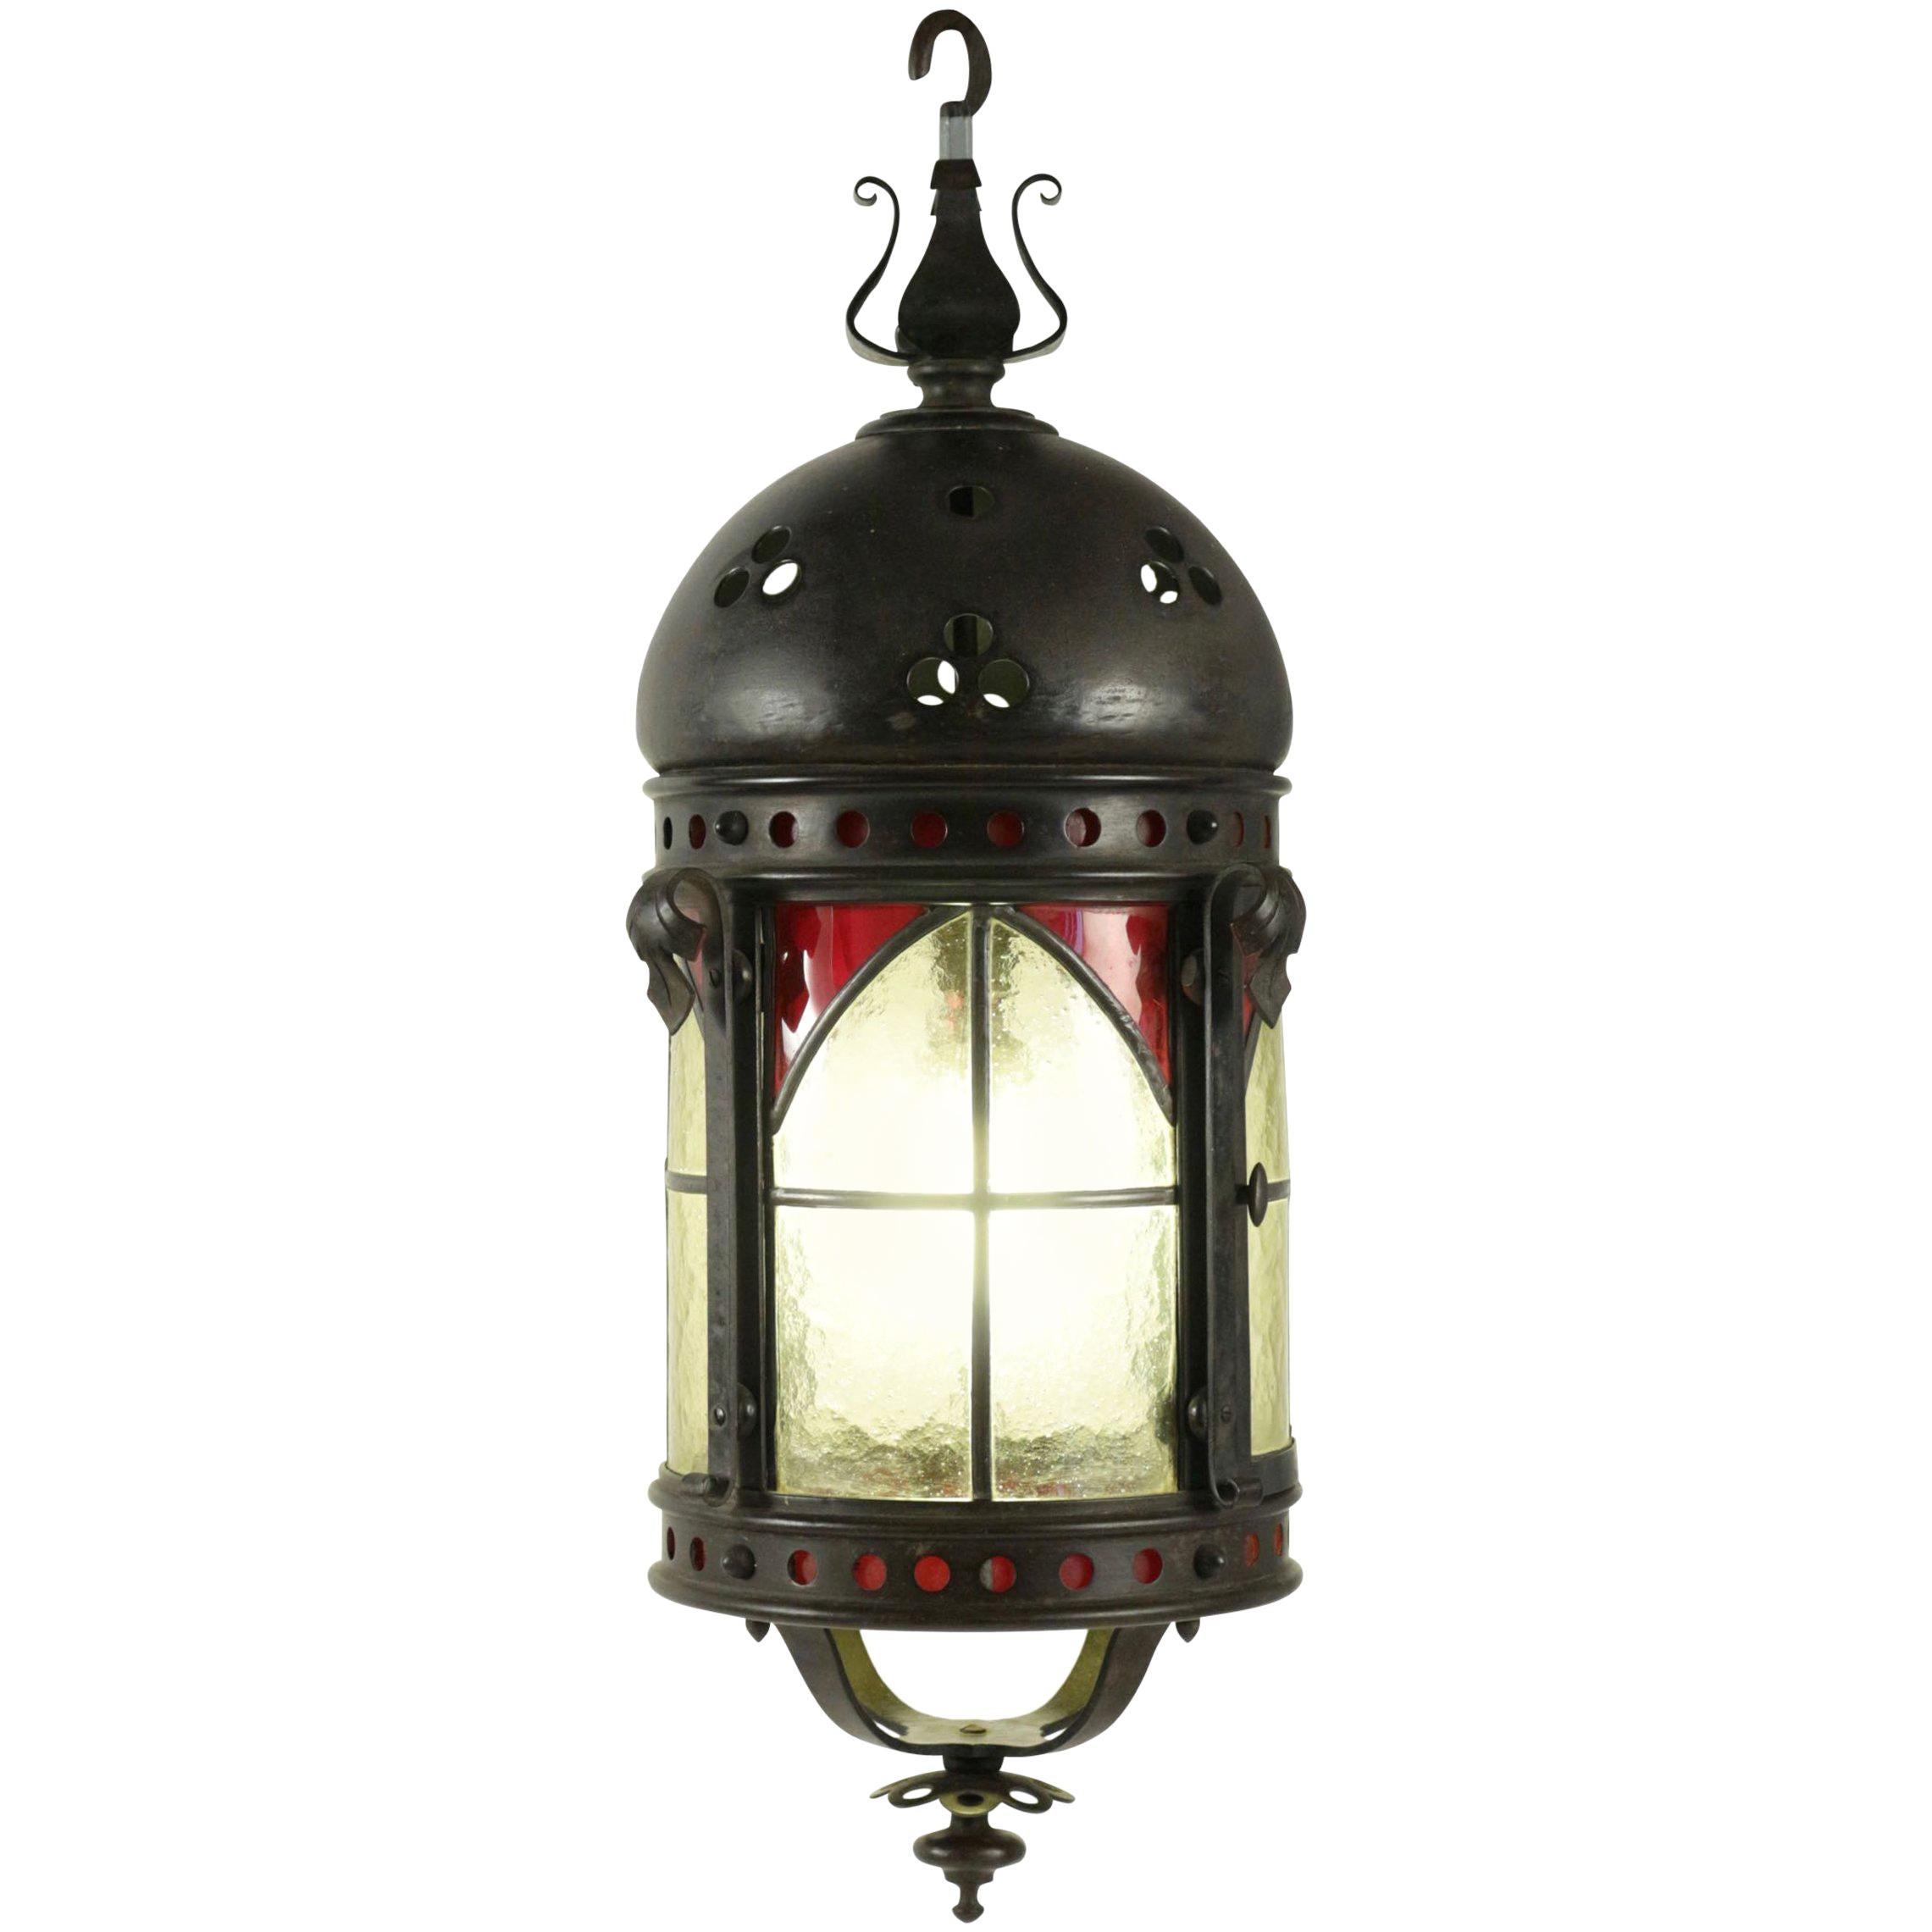 Gohic Single Light Lantern in Wrought Iron and Glass